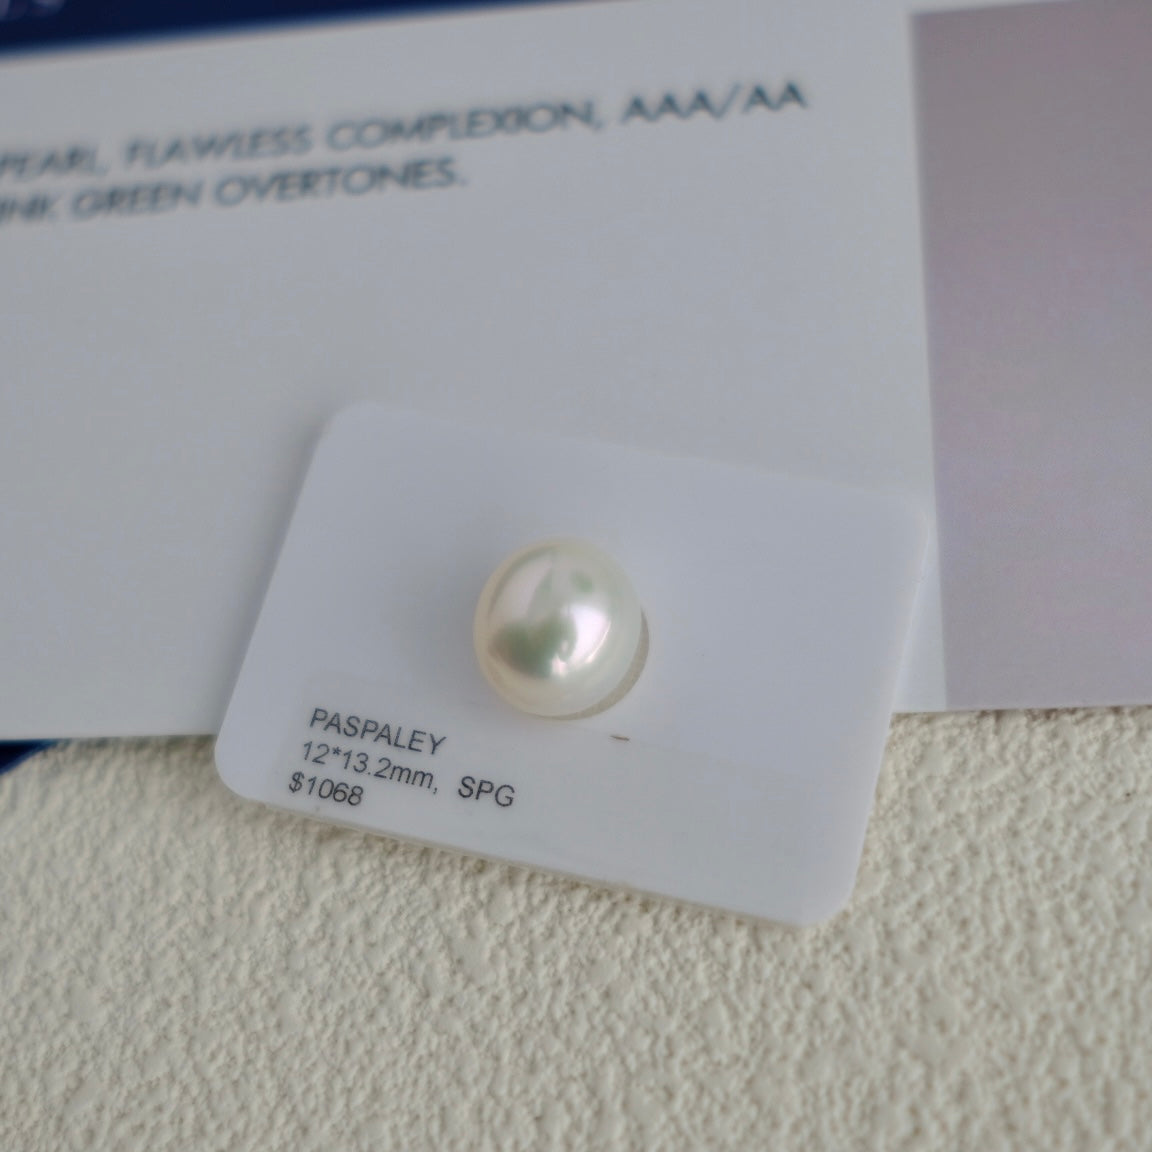 White South Sea Loose Pearl, Single Oval 12*13.2mm, PASPALEY